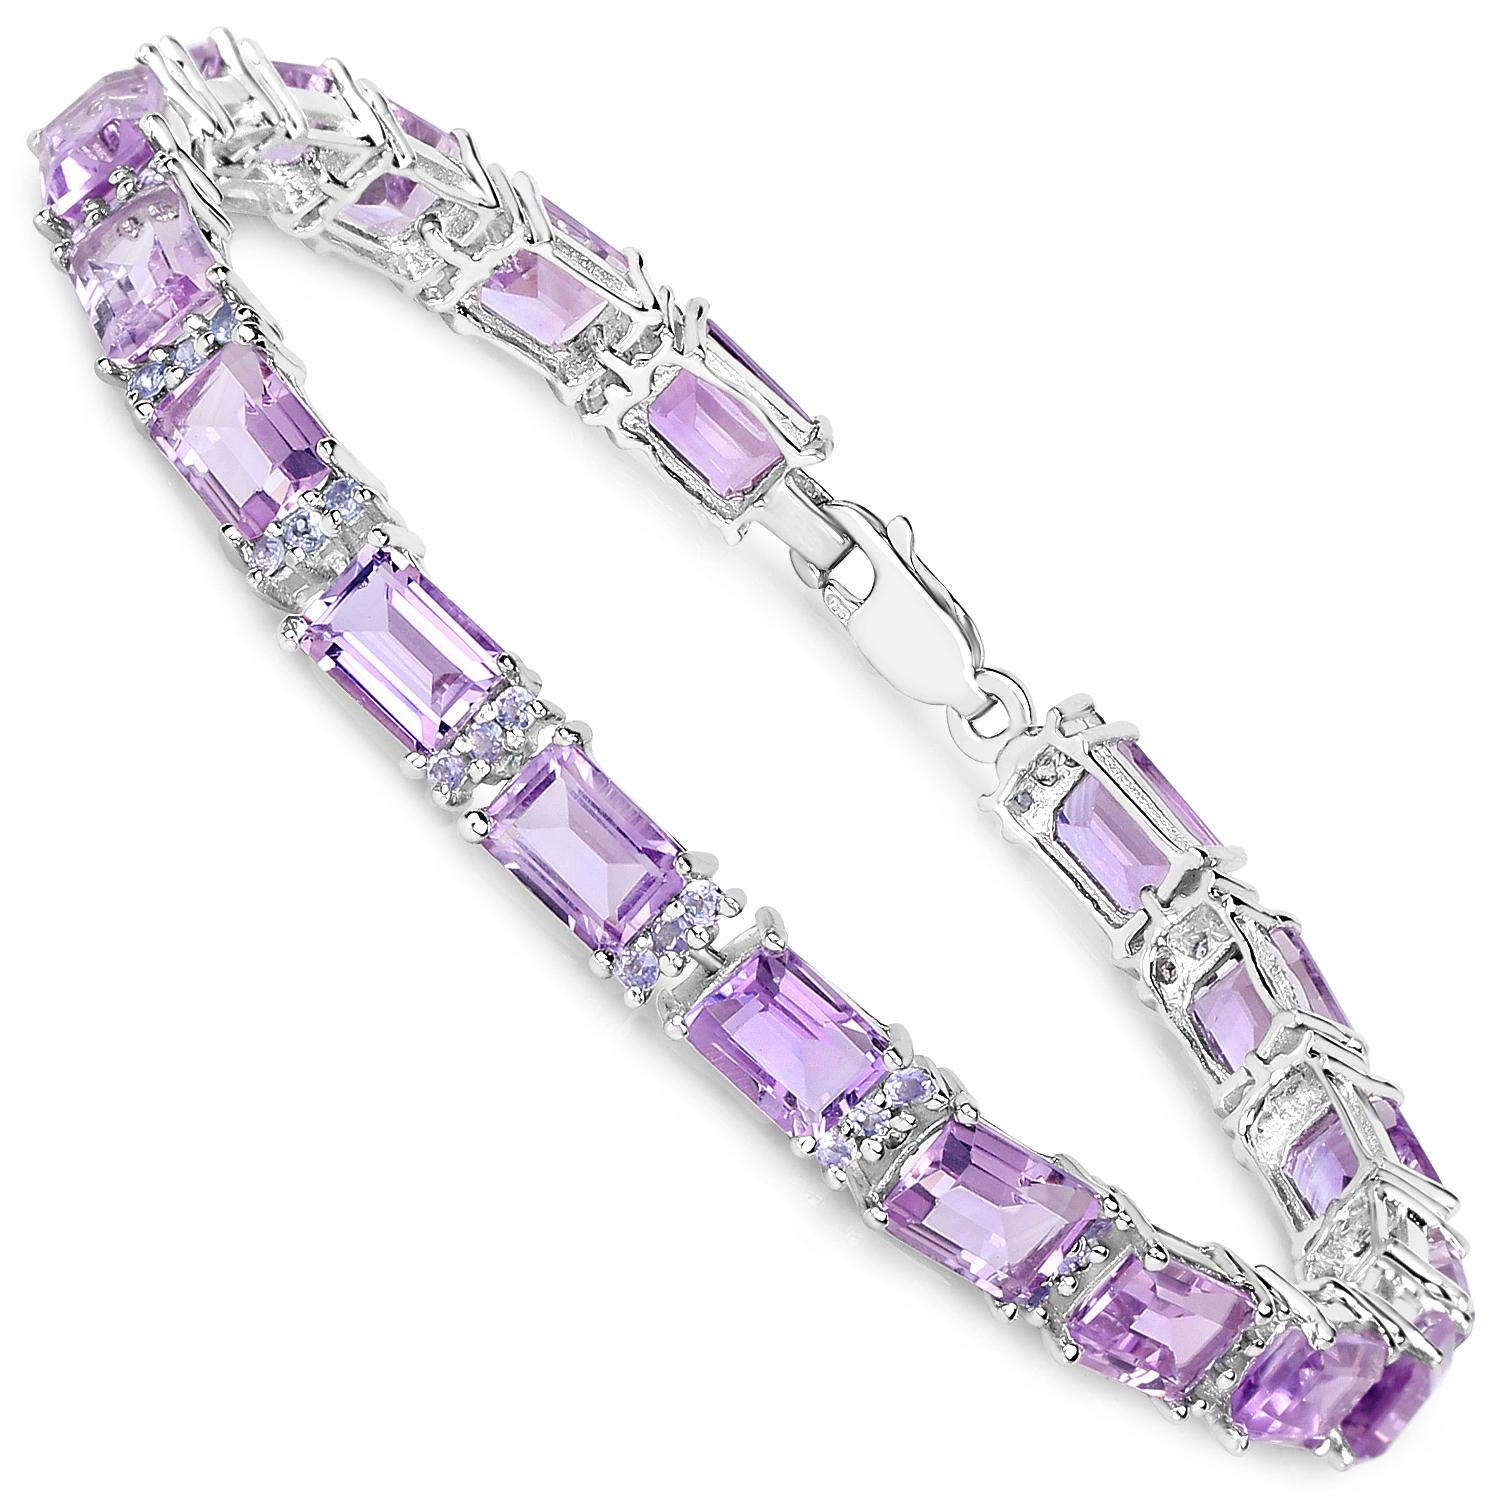 Contemporary Amethyst Bracelet With Tanzanite 19.19 Carats Rhodium Plated Sterling Silver For Sale